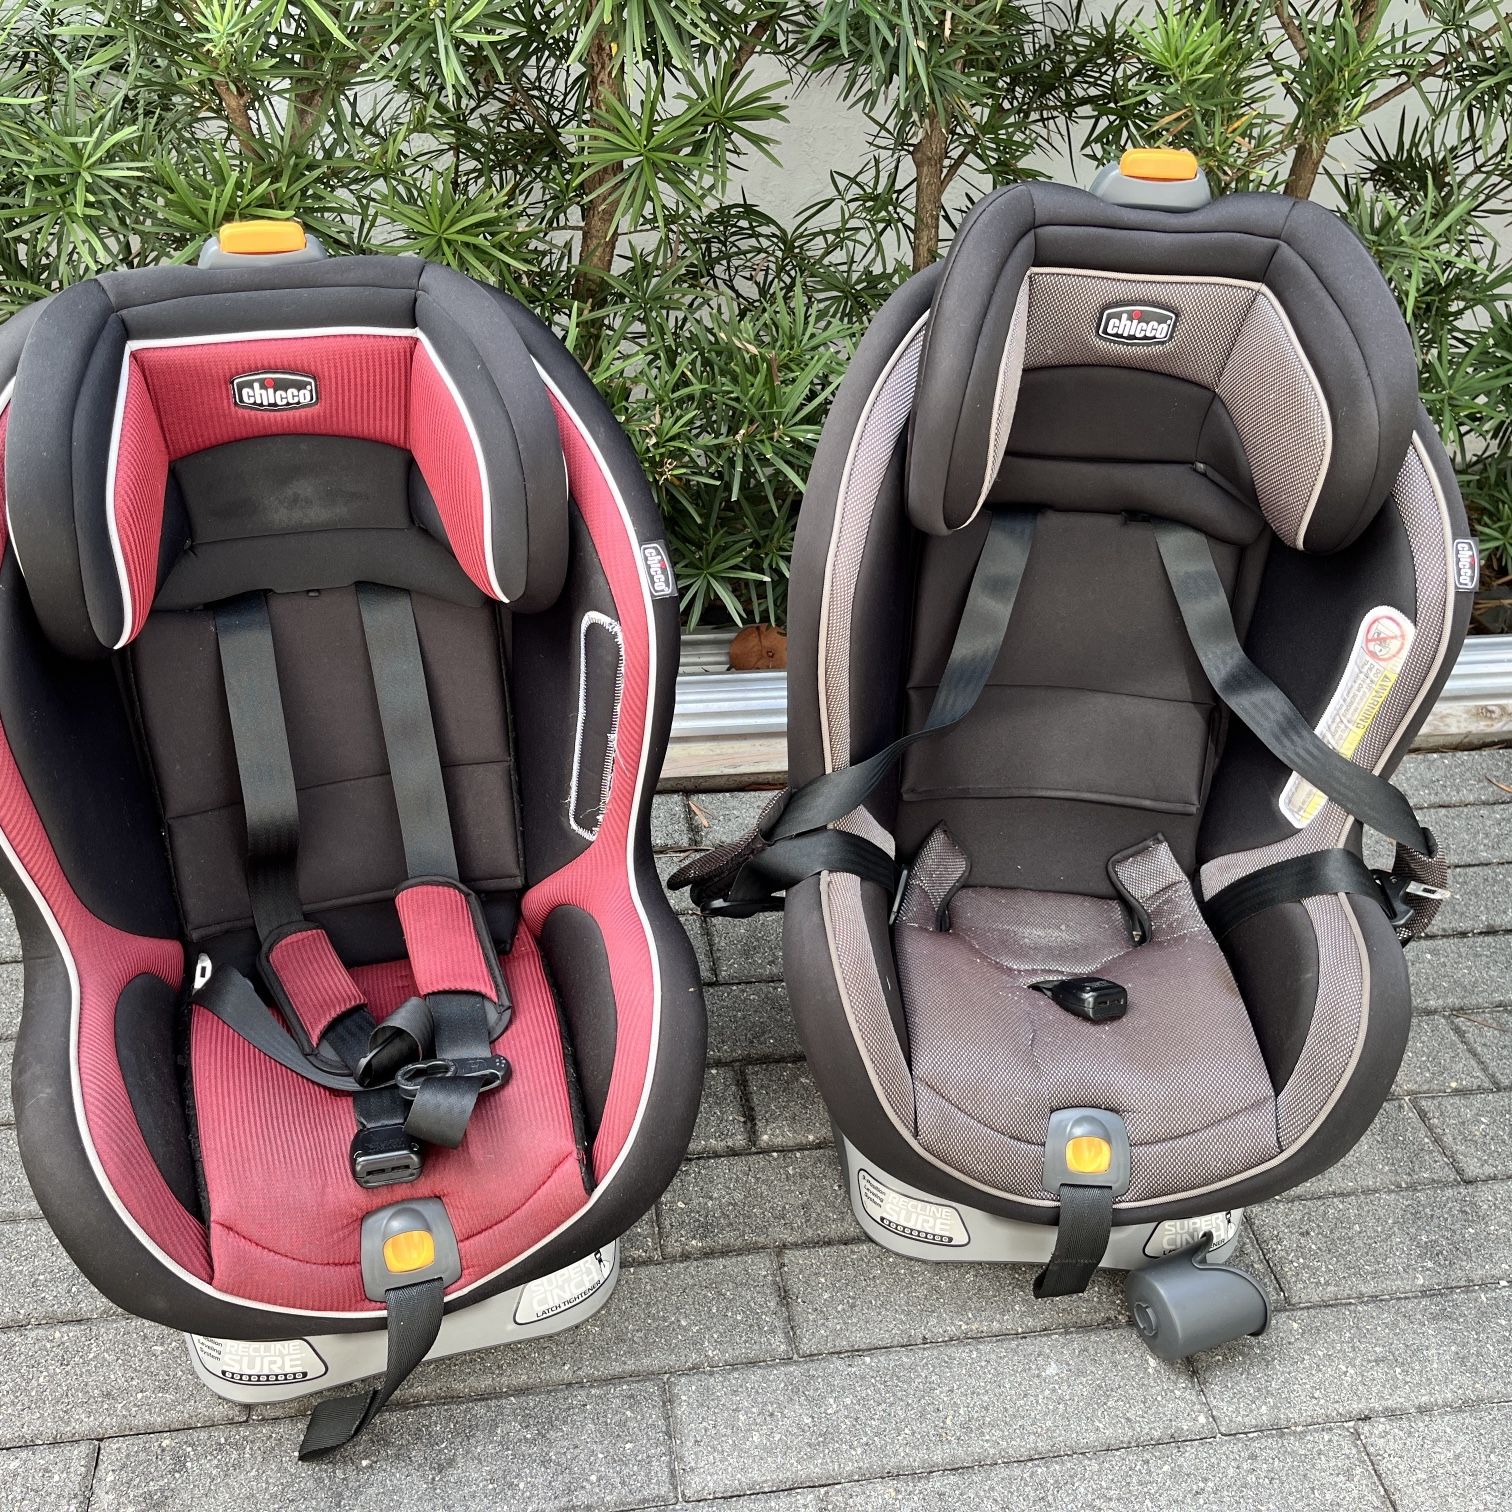 Two (2) Chicco Nextfit Car Seats